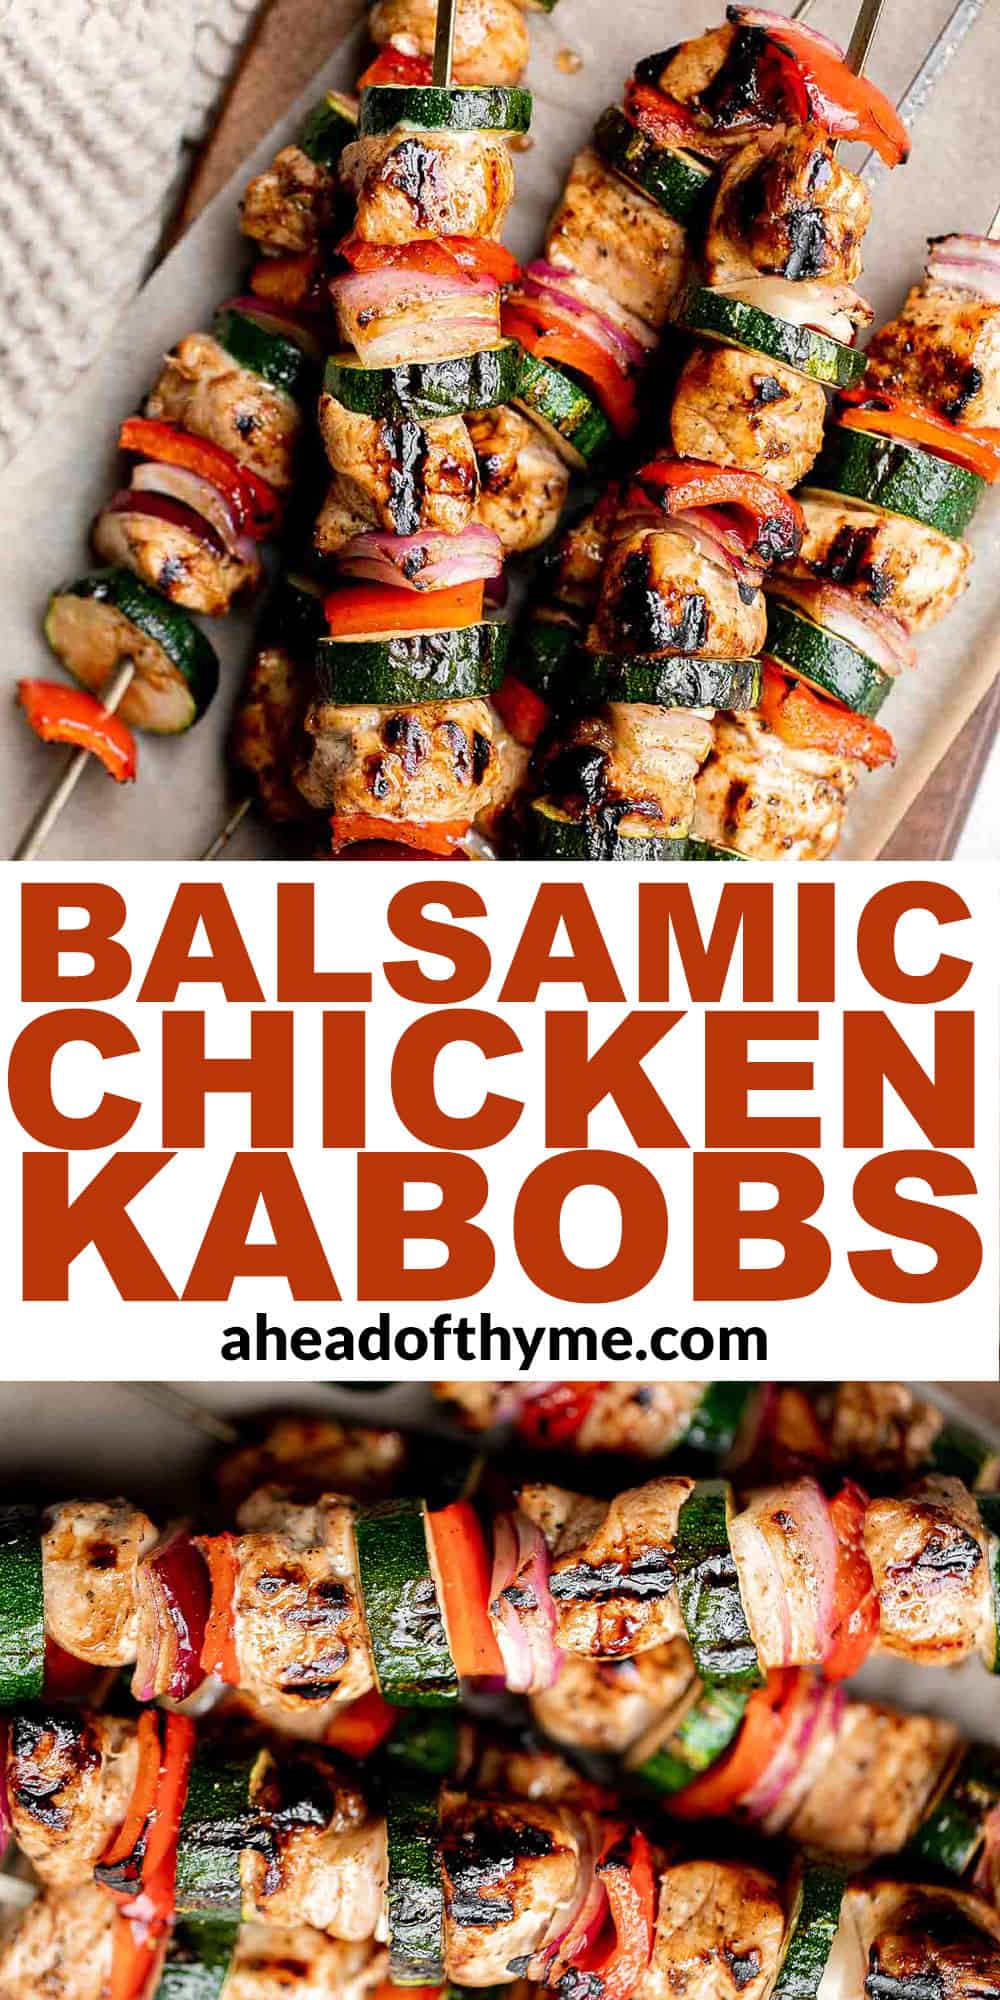 Grilled Balsamic Chicken Kabobs are a delicious flavorful summer grill staple marinated in a balsamic sauce, skewered with vegetables, and grilled or baked. | aheadofthyme.com